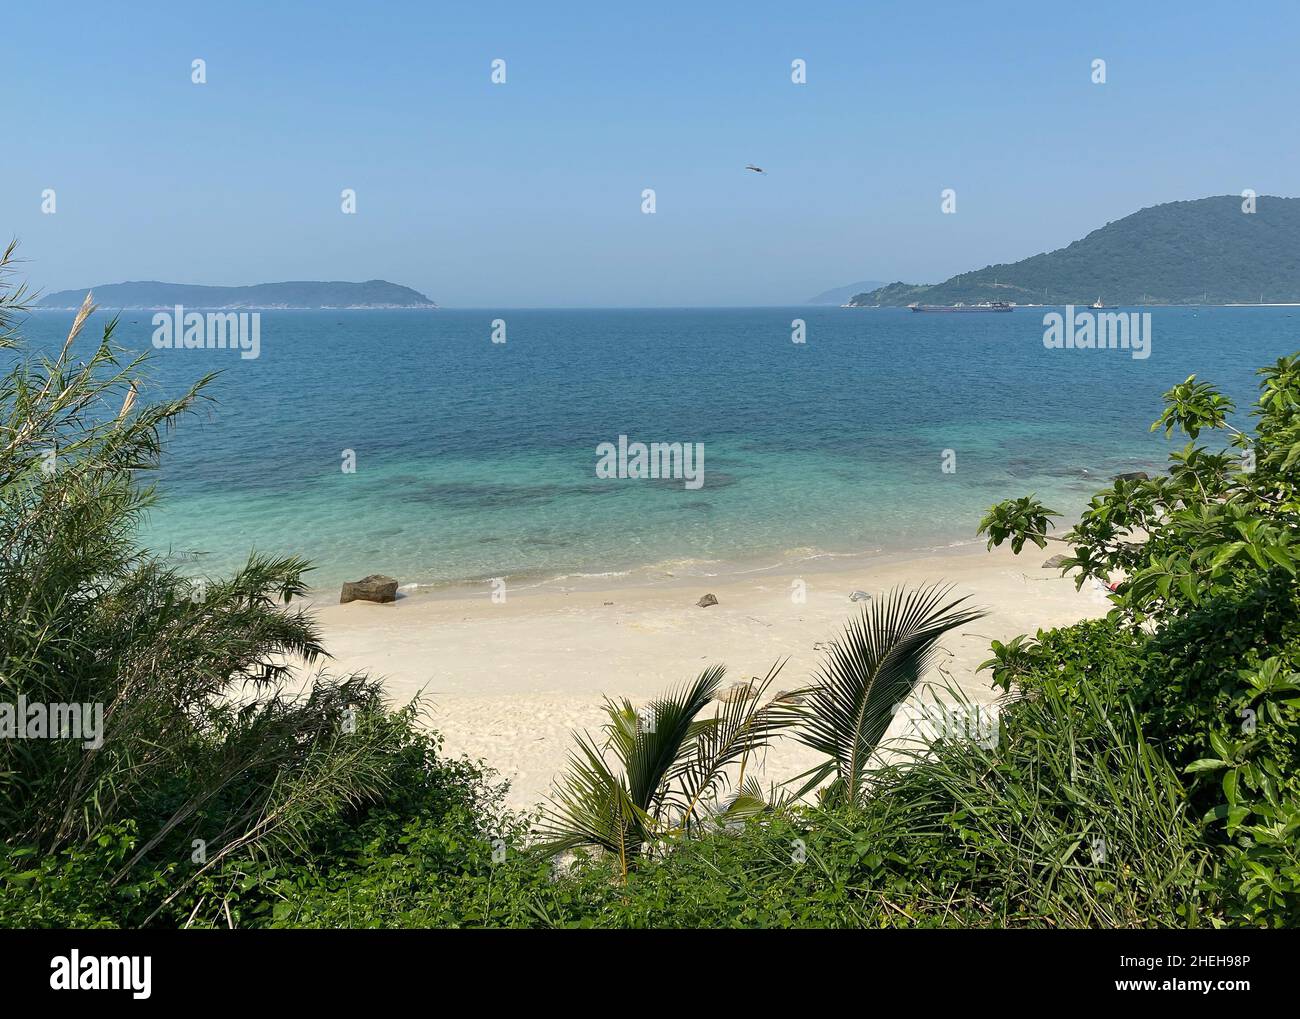 Seascape of Cu Lao Cham Island, Vietnam. The beautiful island is located 120km from Hoi An, an interesting destination in the summer. Stock Photo